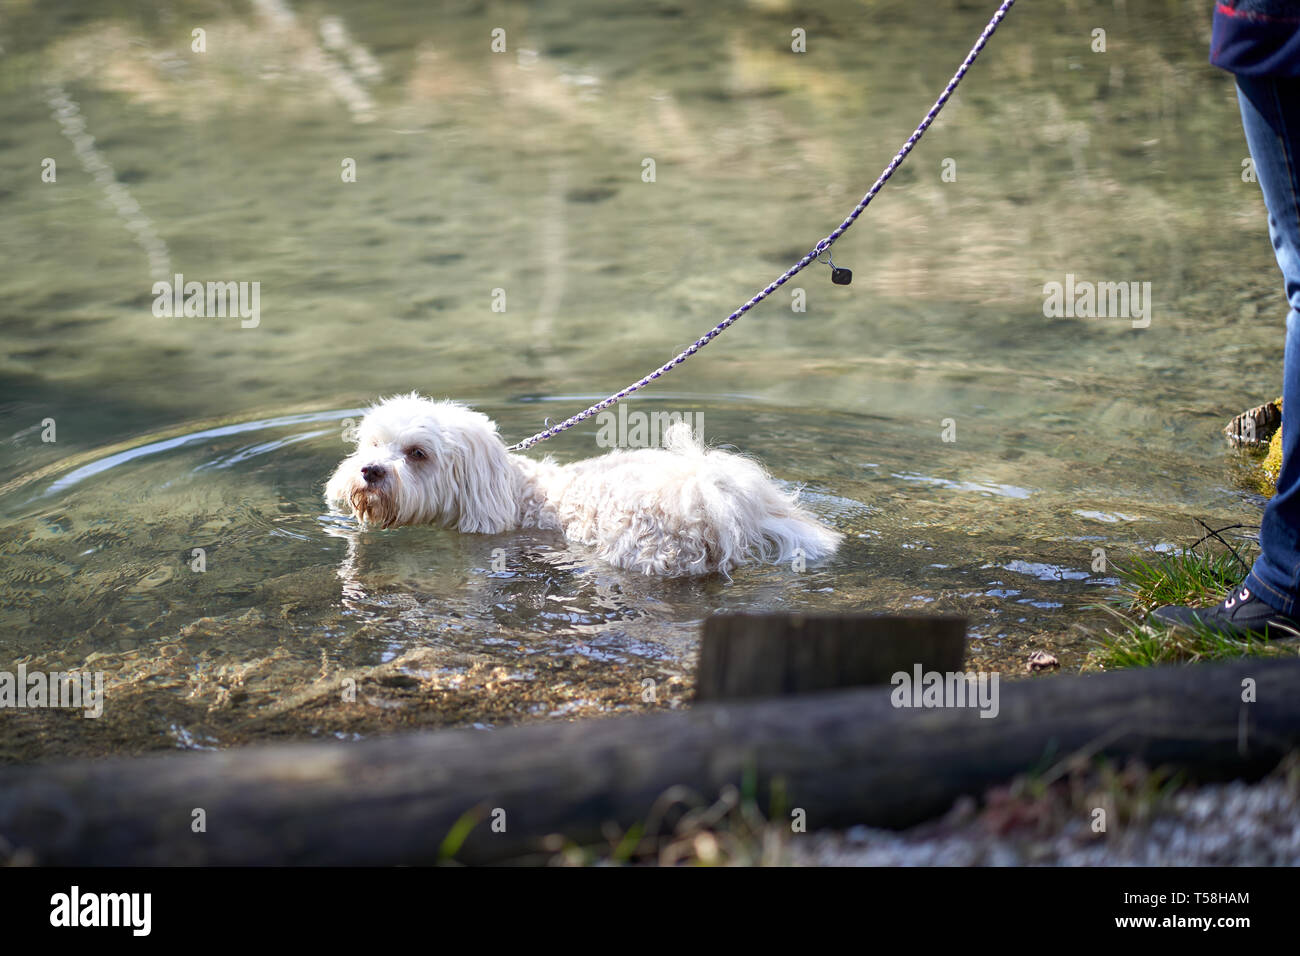 Havanese dog swimming in the pond Stock Photo